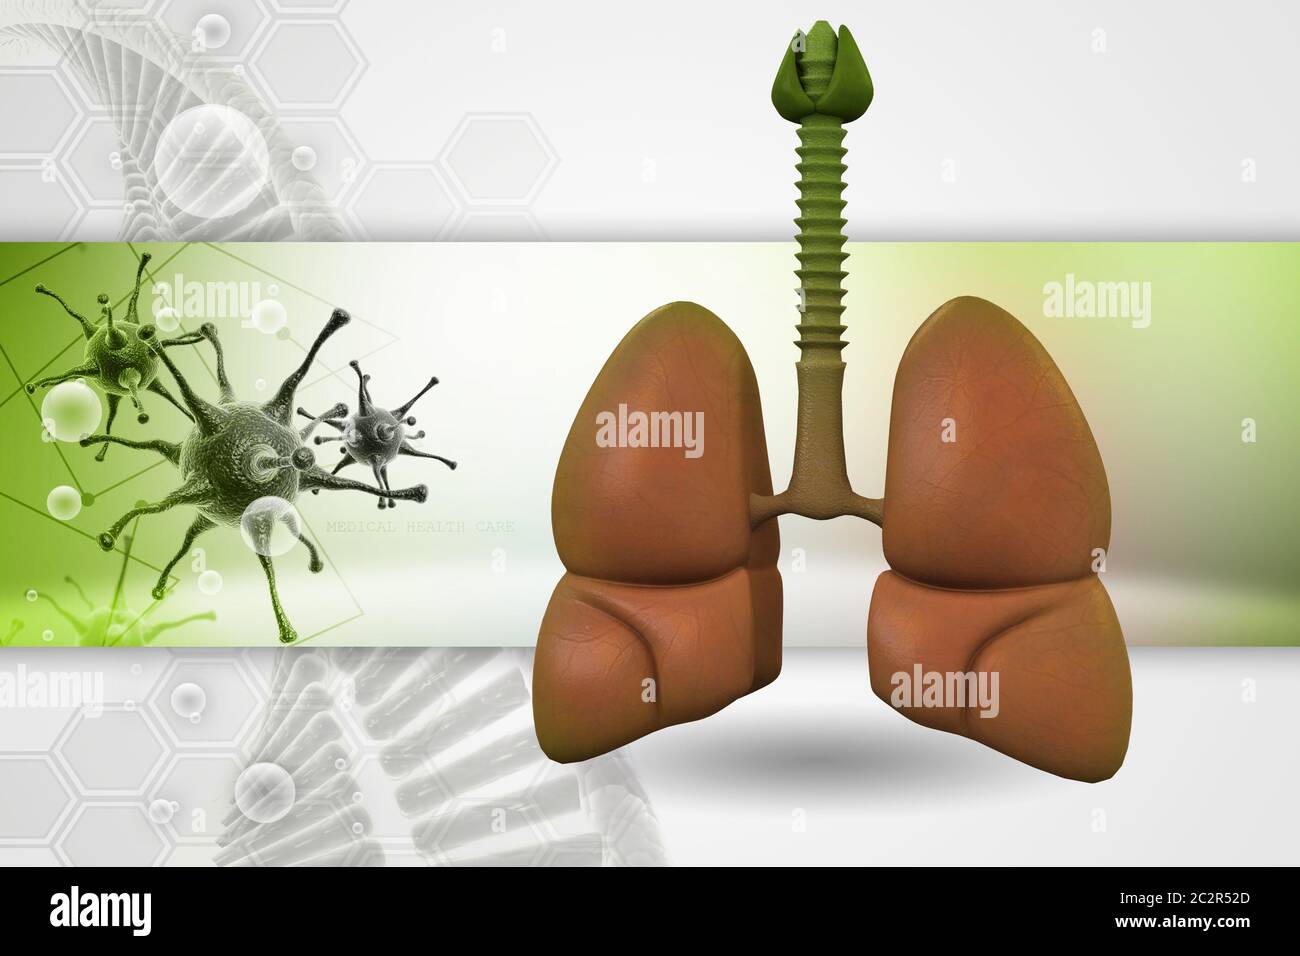 Human lungs Stock Photo